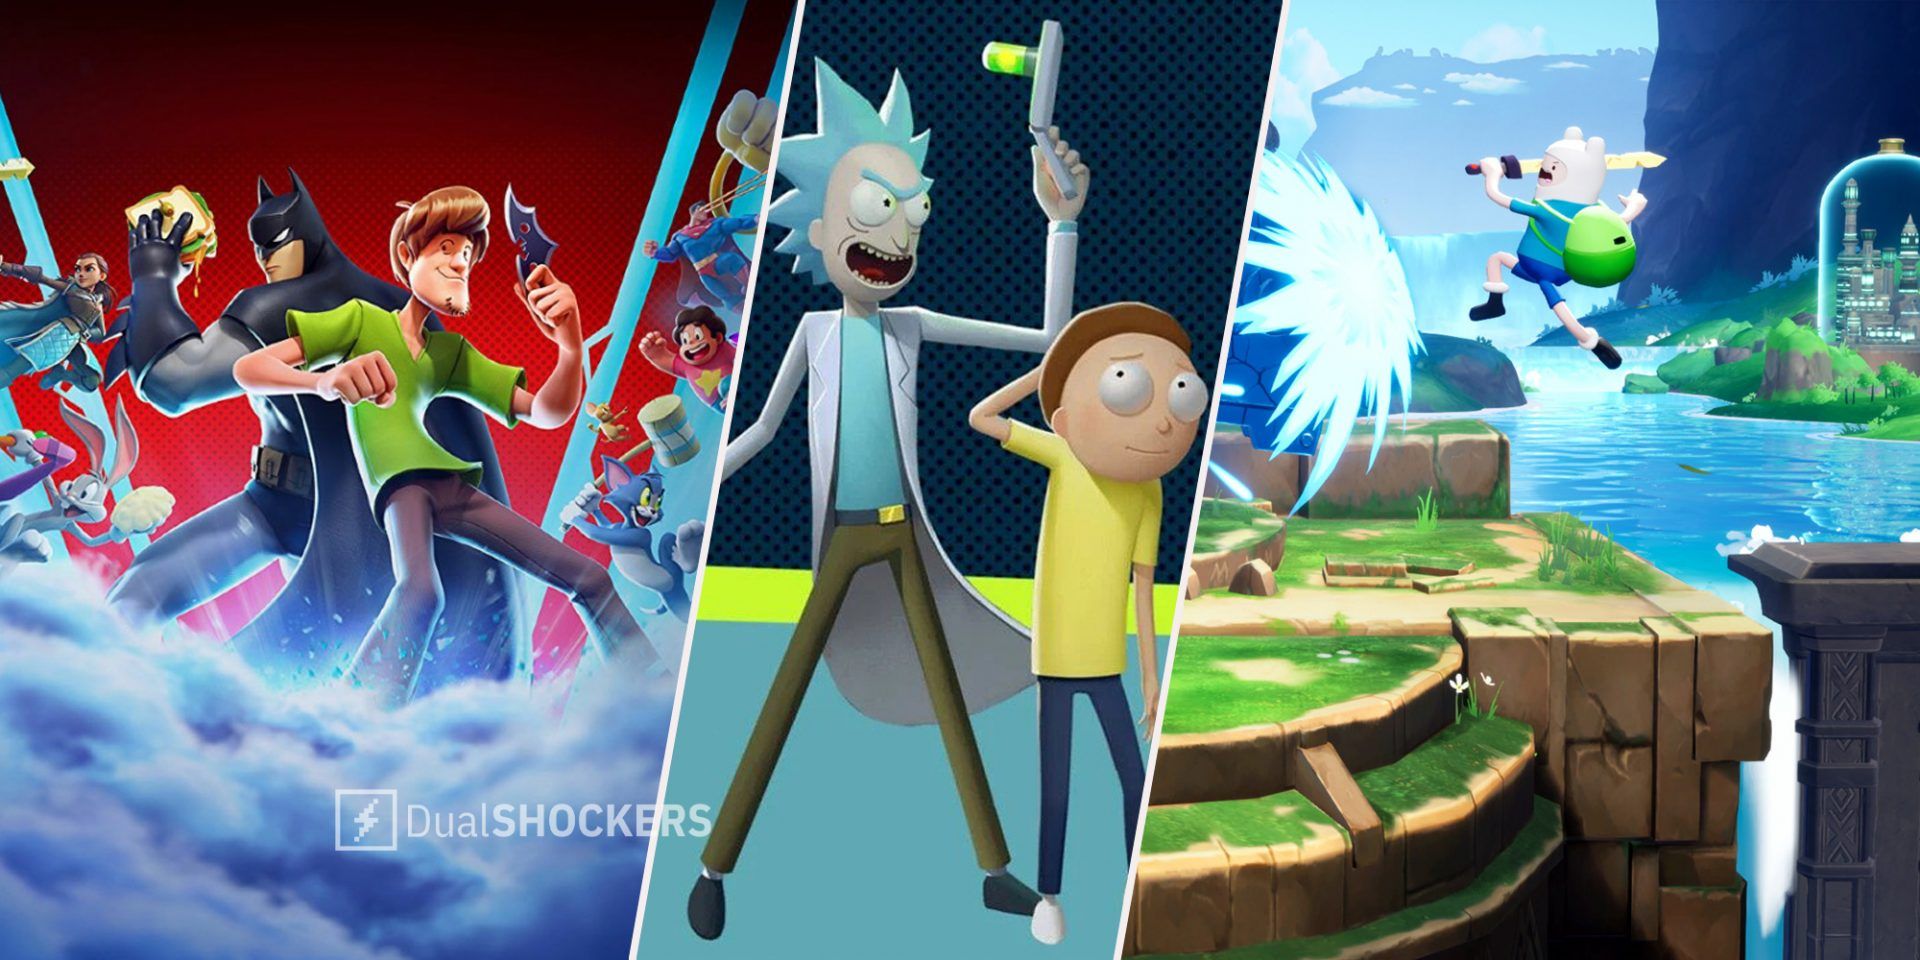 MultiVersus promo image with Shaggy, Batman, Steven Universe on left, Rick and Morty in middle, Finn from Adventure Time in the middle of a battle on right